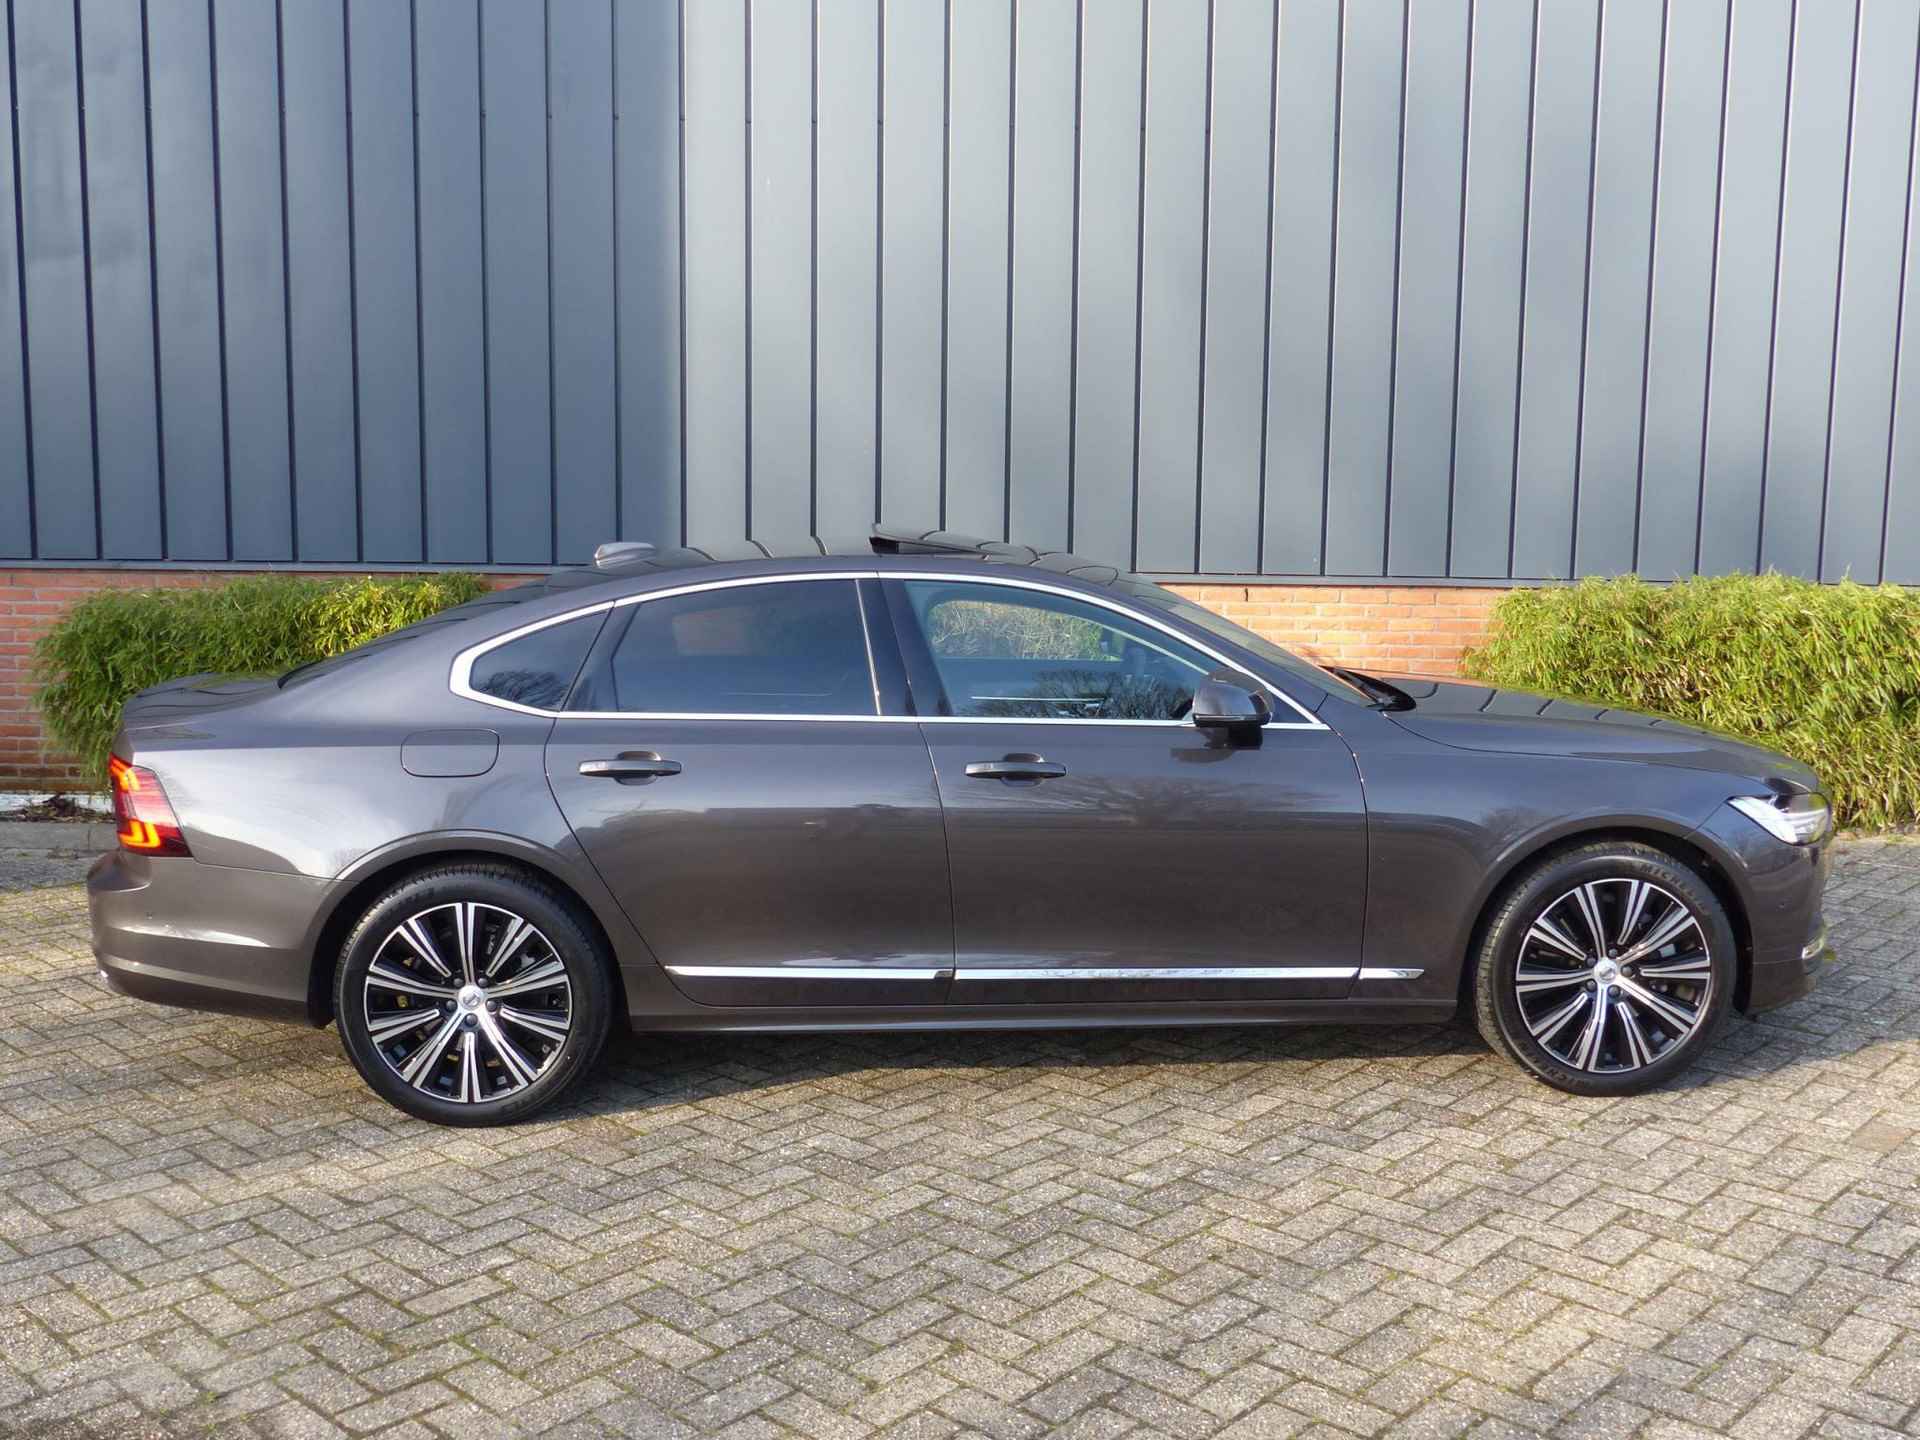 Volvo S90 B5 Ultimate Bright |Luchtvering| Bowers & Wilkins| Nappa Leder| - 2/34